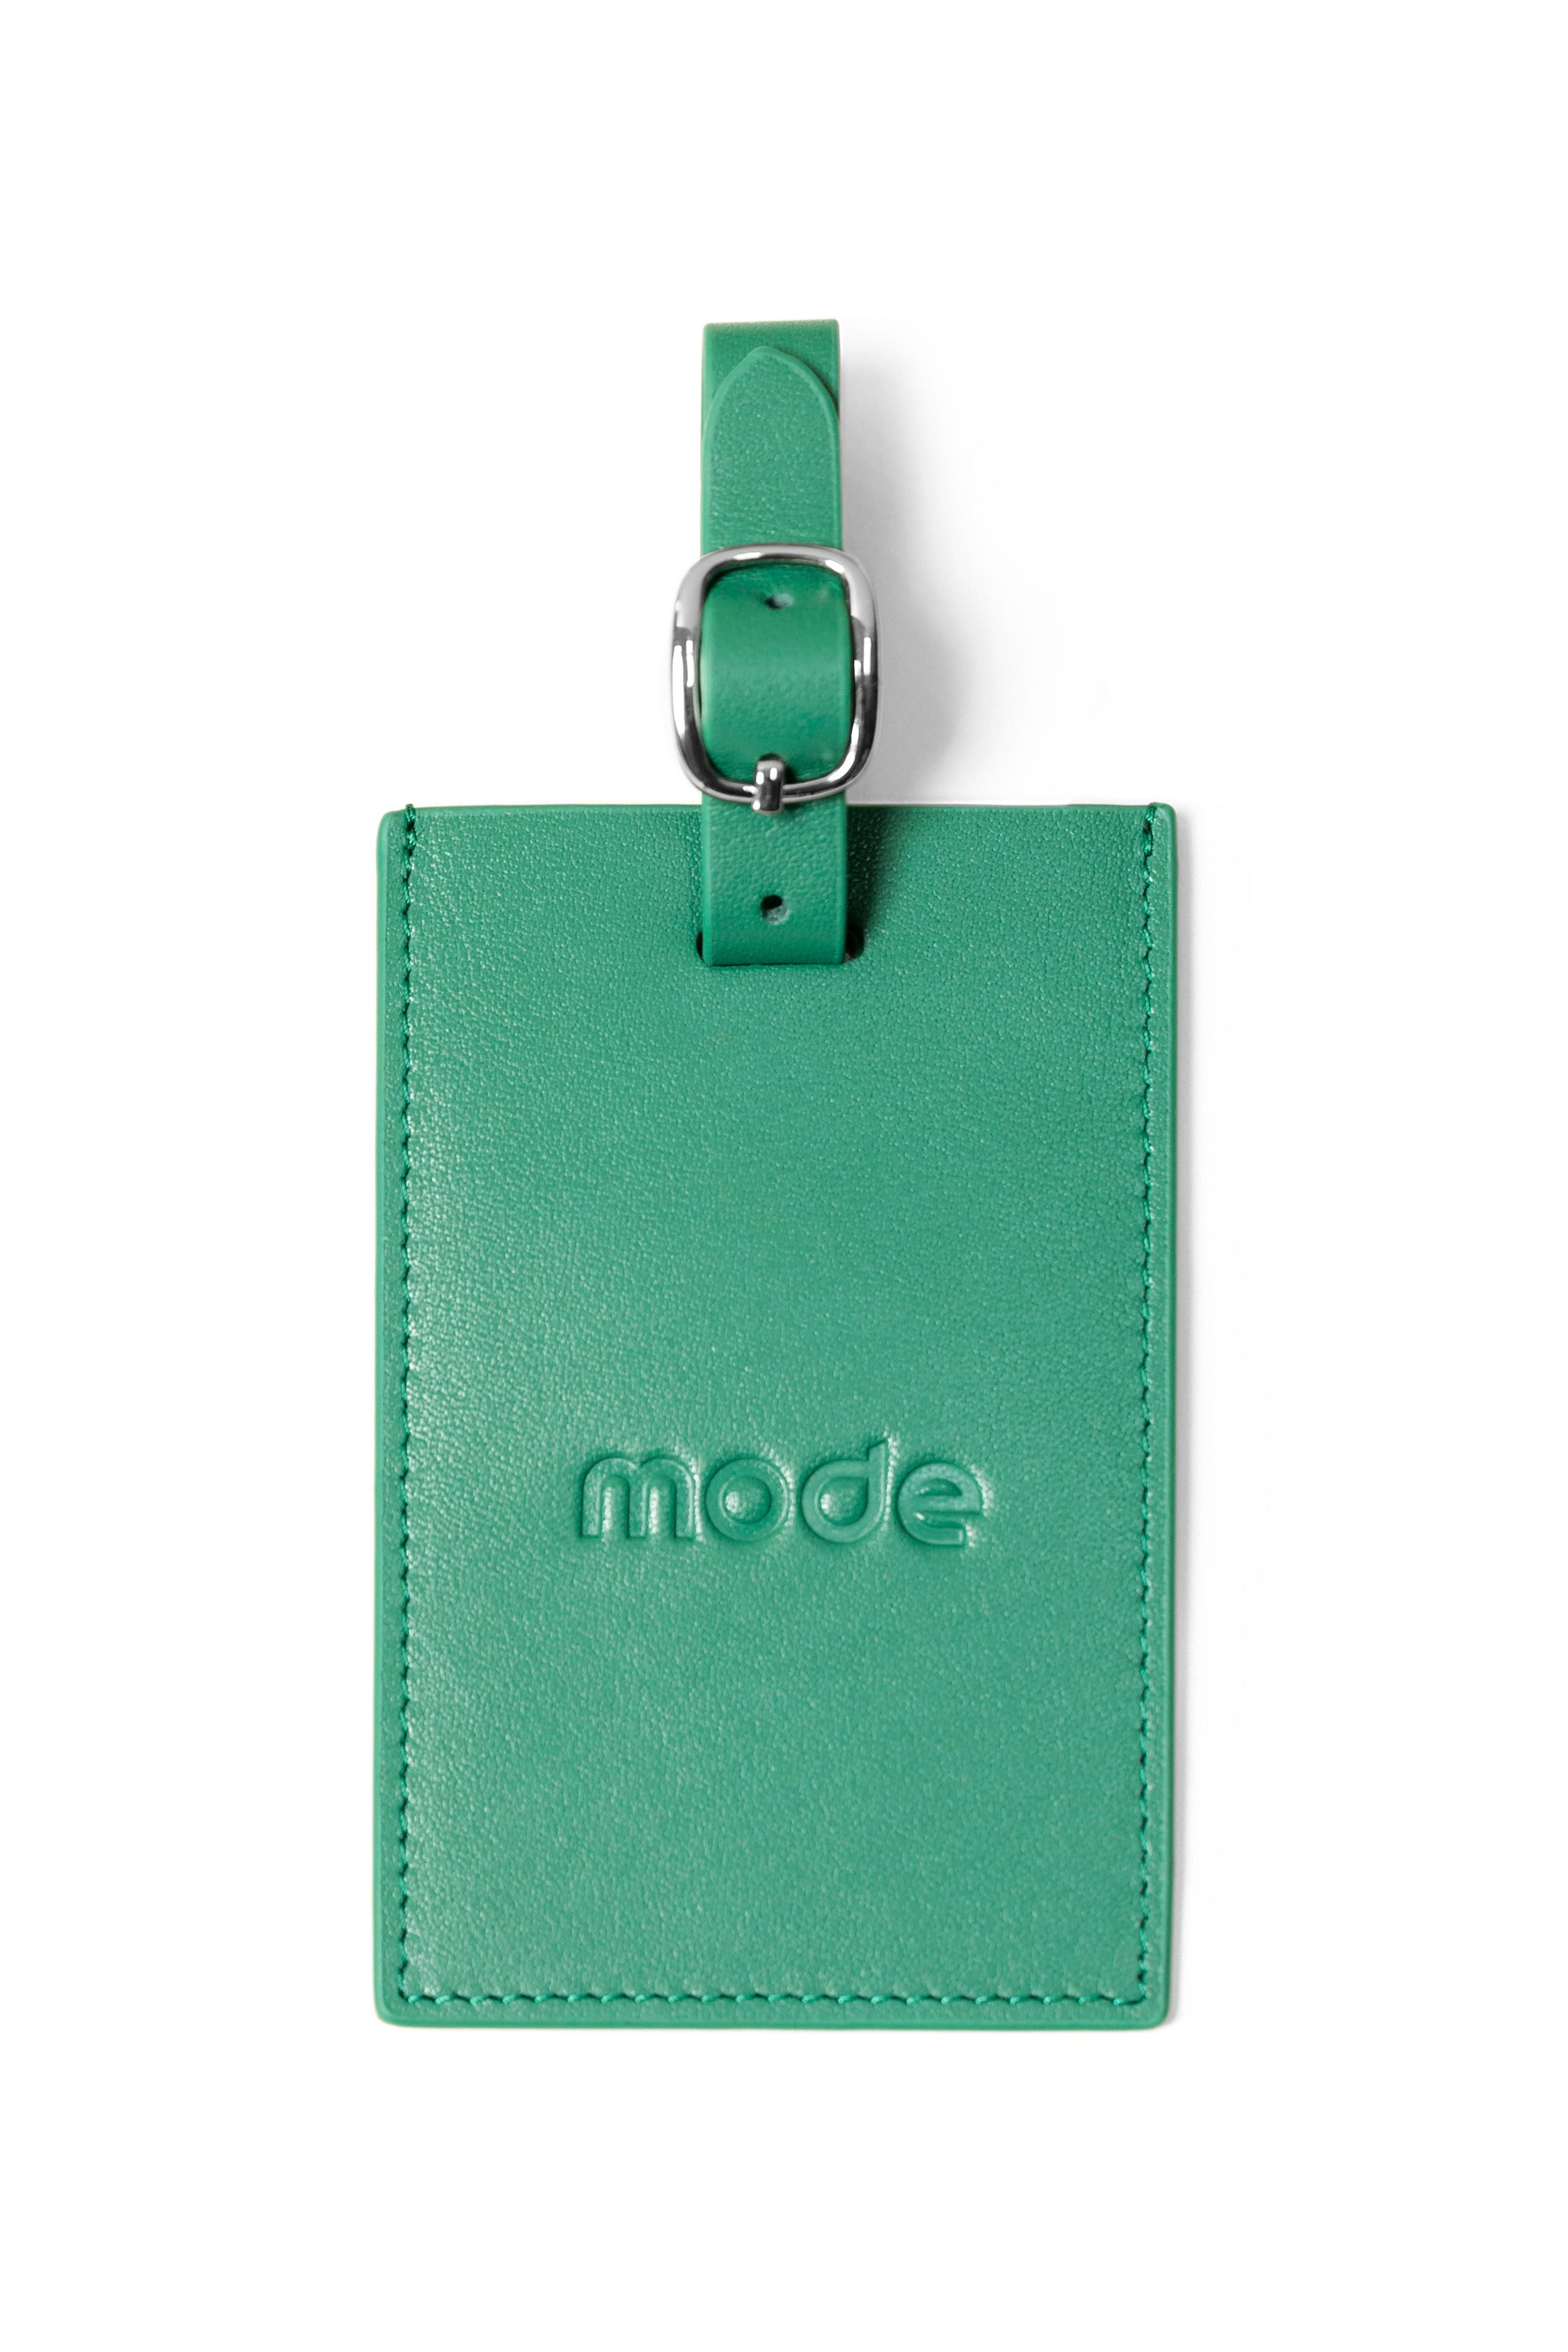 The Luggage Tag – MODE